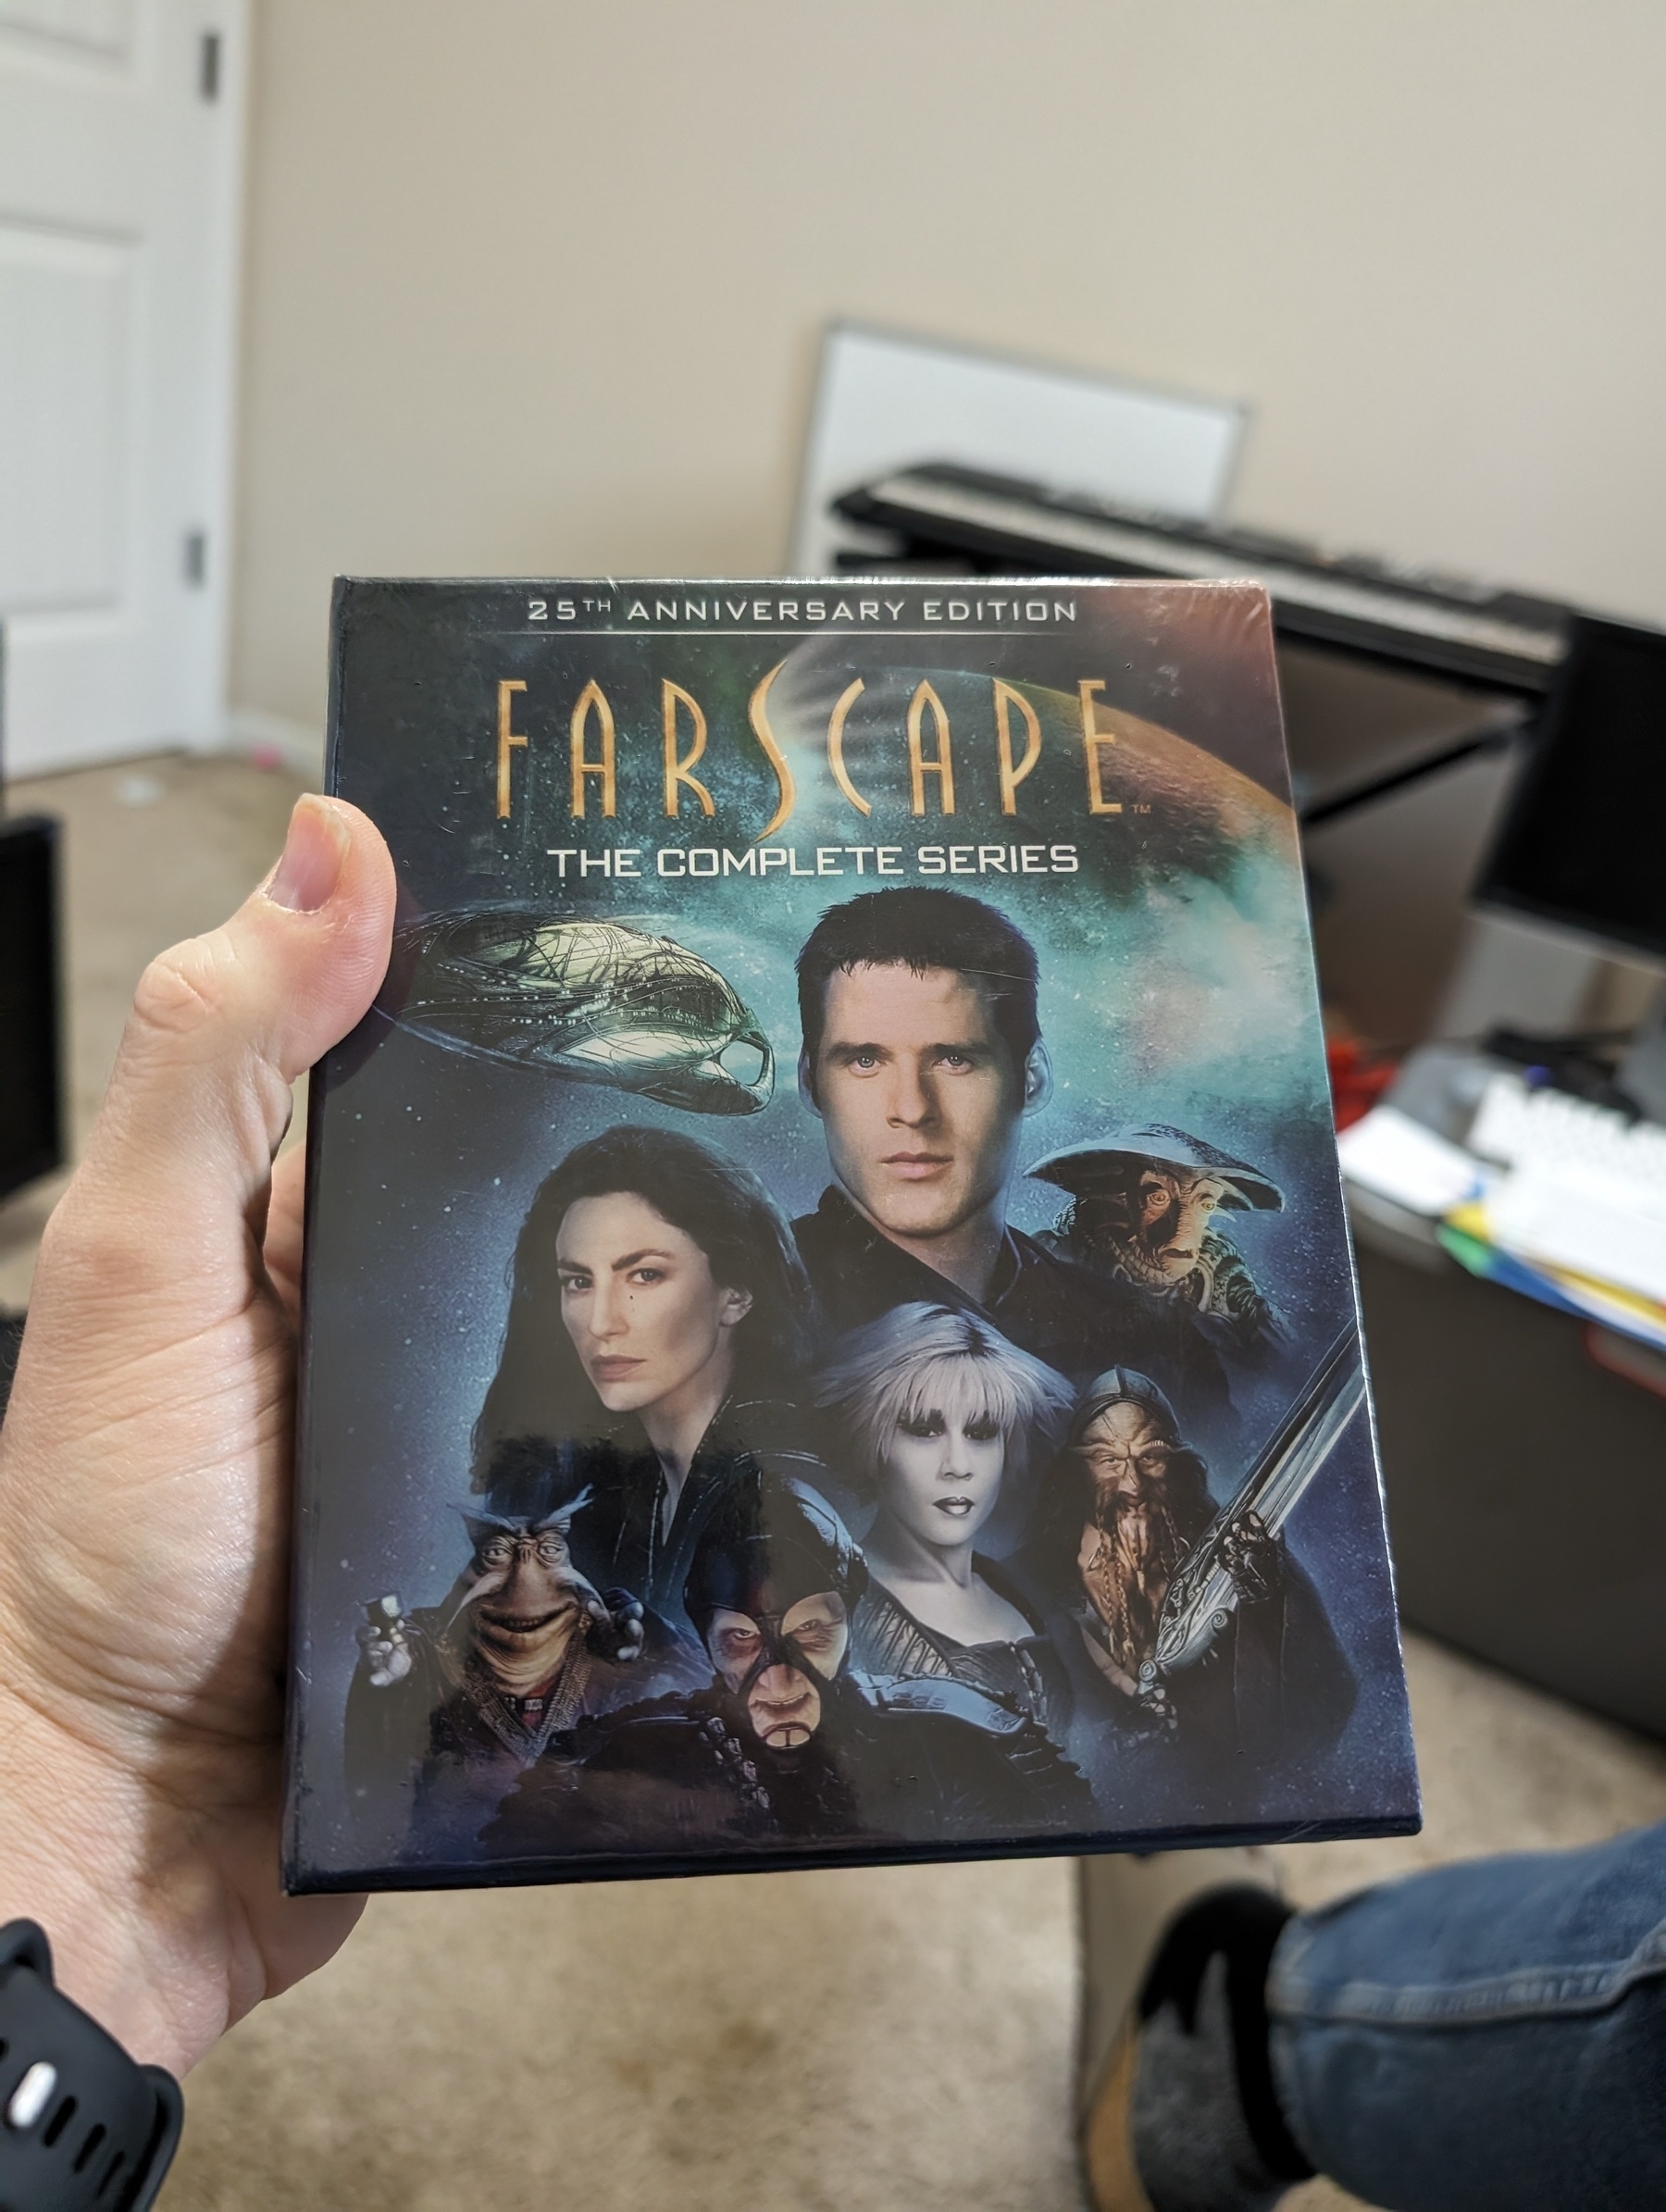 Photo of "Farscape: The Complete Series, 25th Anniversary Edition" Blu-ray set.